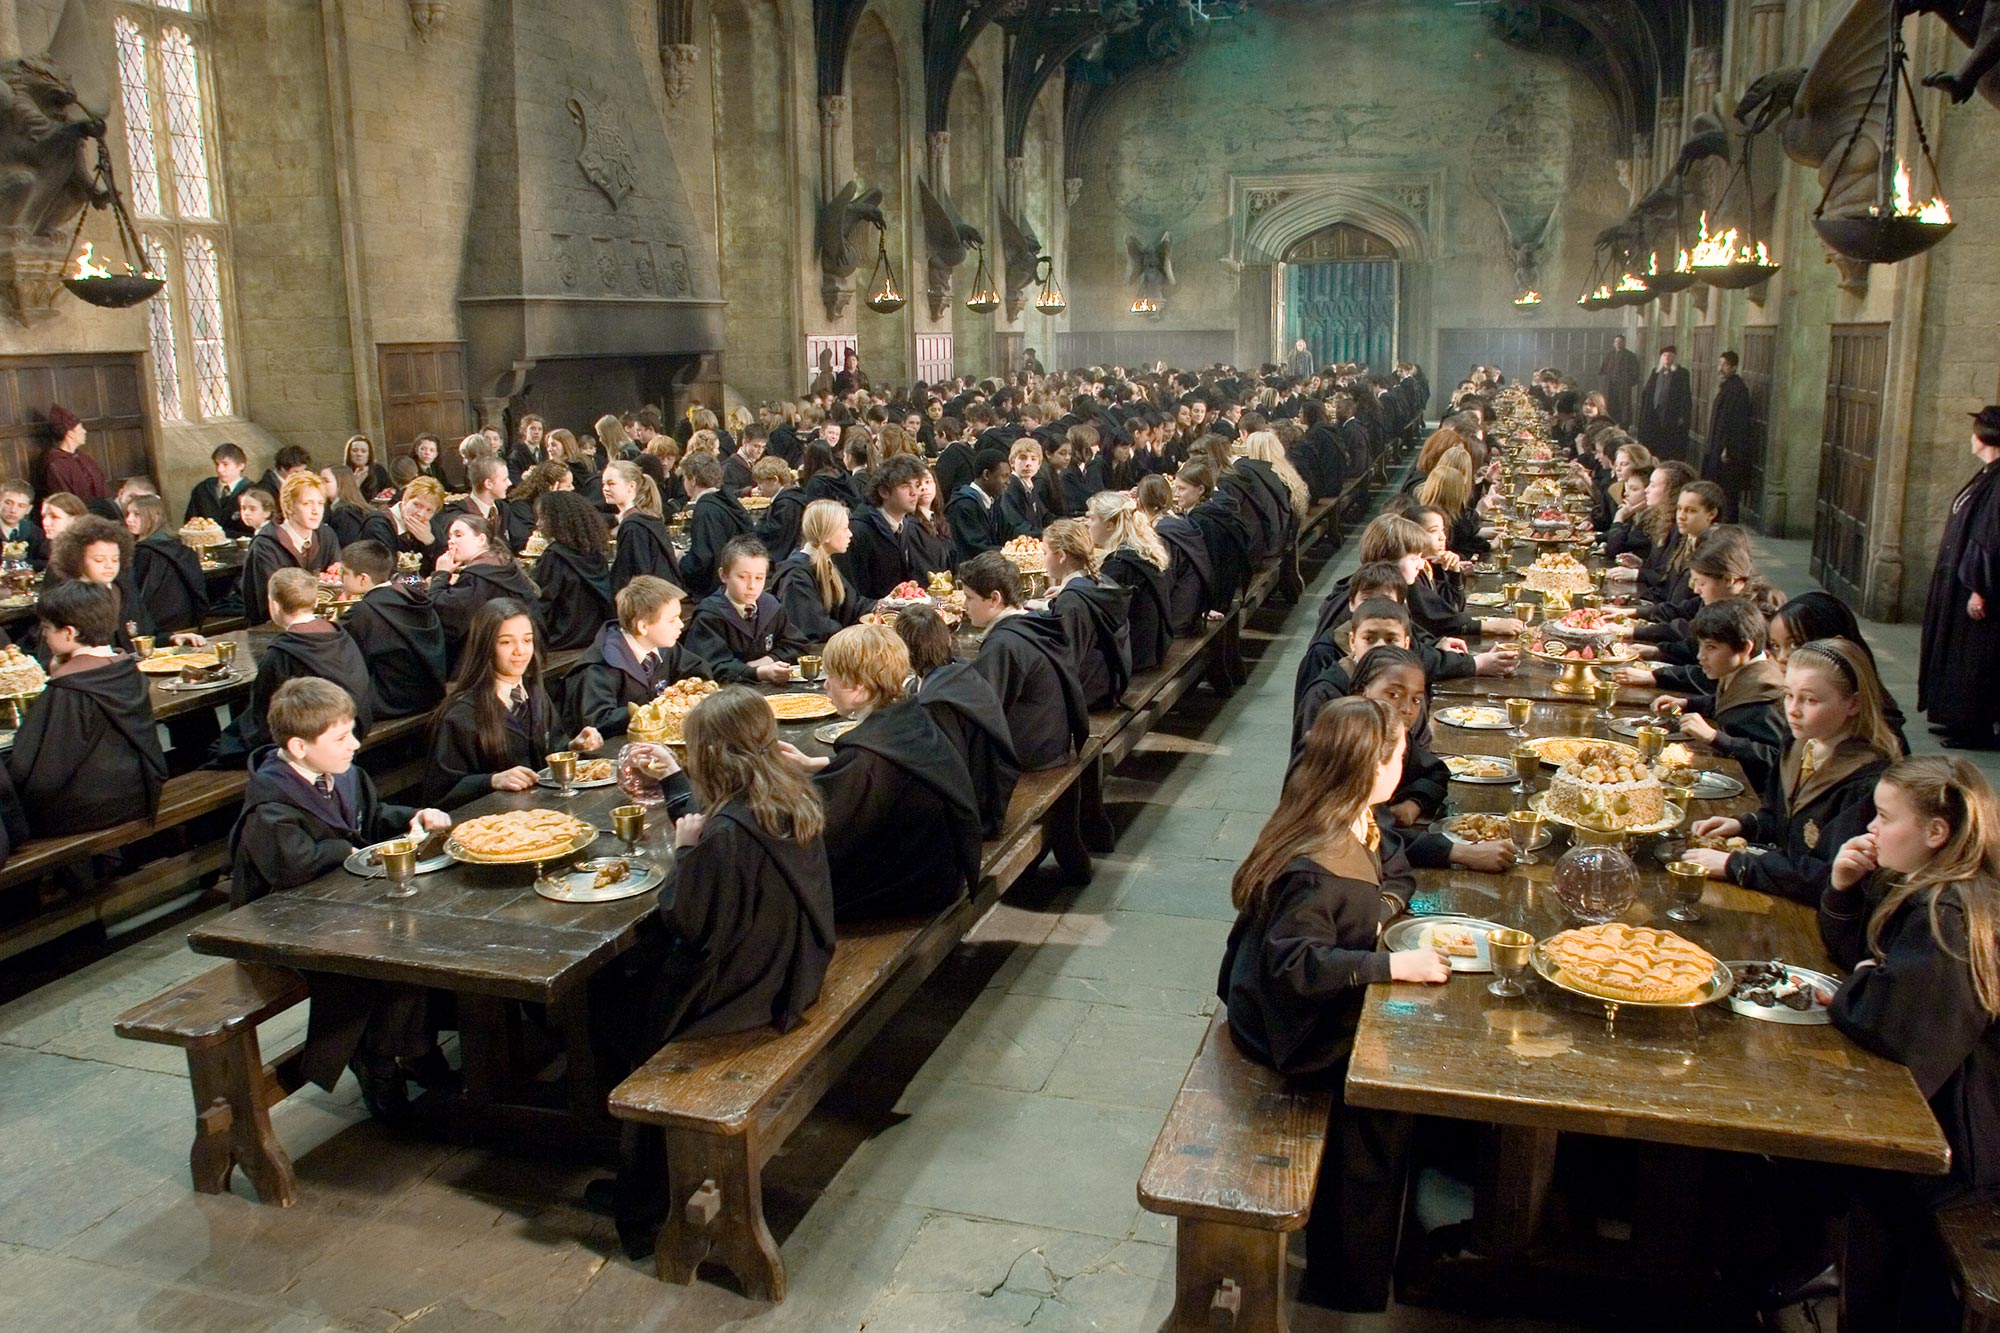 Harry Potter- the Great Hall of Hogwarts Castle